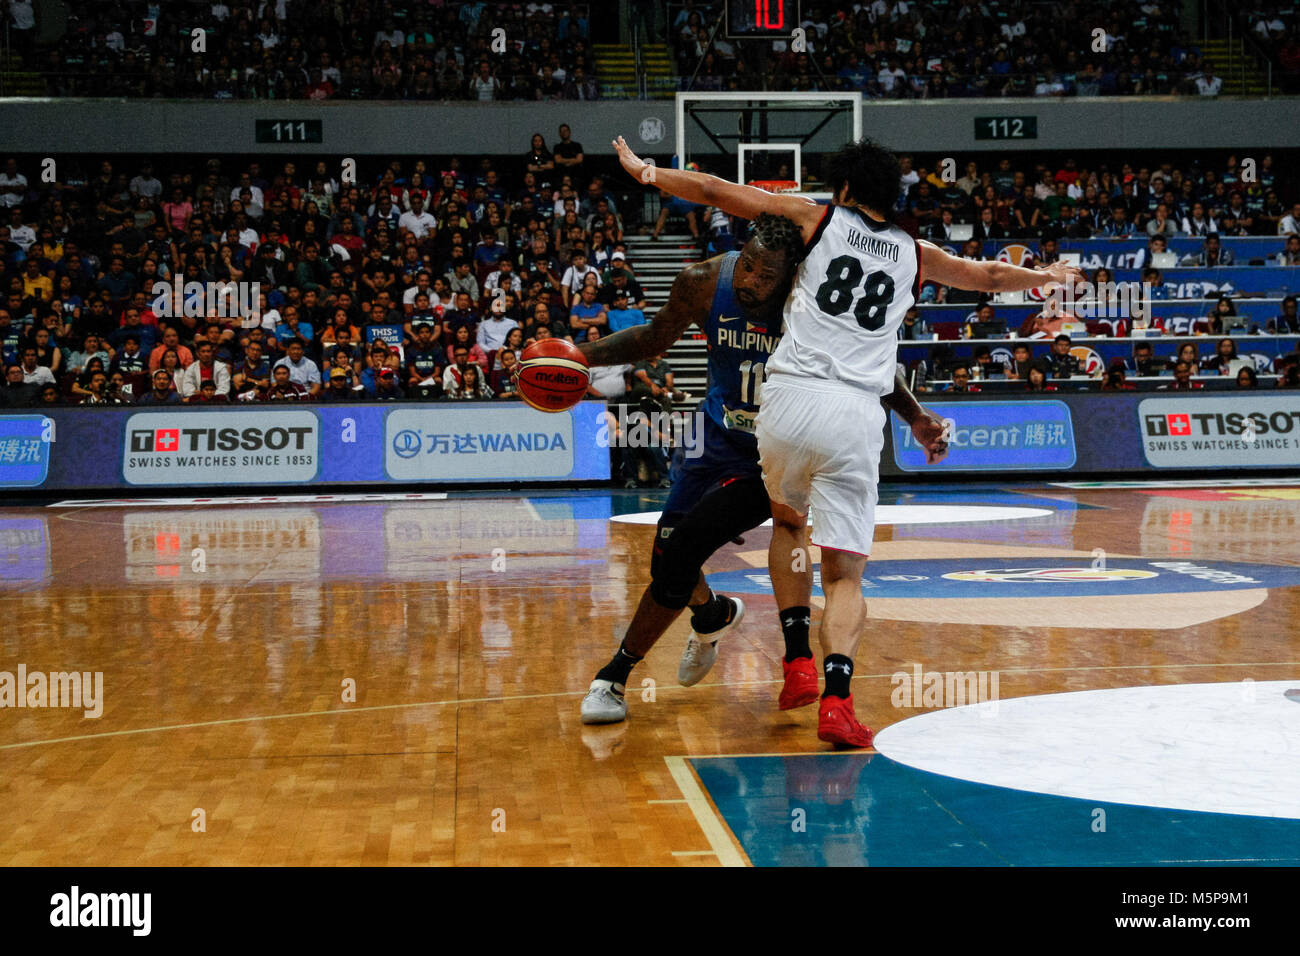 Philippines. 25th Feb, 2018. Andray Blatche (11) makes his way against Tenketsu Harimoto (88) during the qualifying game at the MOA Arena. The Philippine and Japanese basketball team met at the hardcourt of the Mall of Asia Arena in Pasay City, for the FIBA World Cup 2019 Asian Qualifiers. The Philippines won over Japan, 89-84. Credit: J Gerard Seguia/ZUMA Wire/Alamy Live News Stock Photo